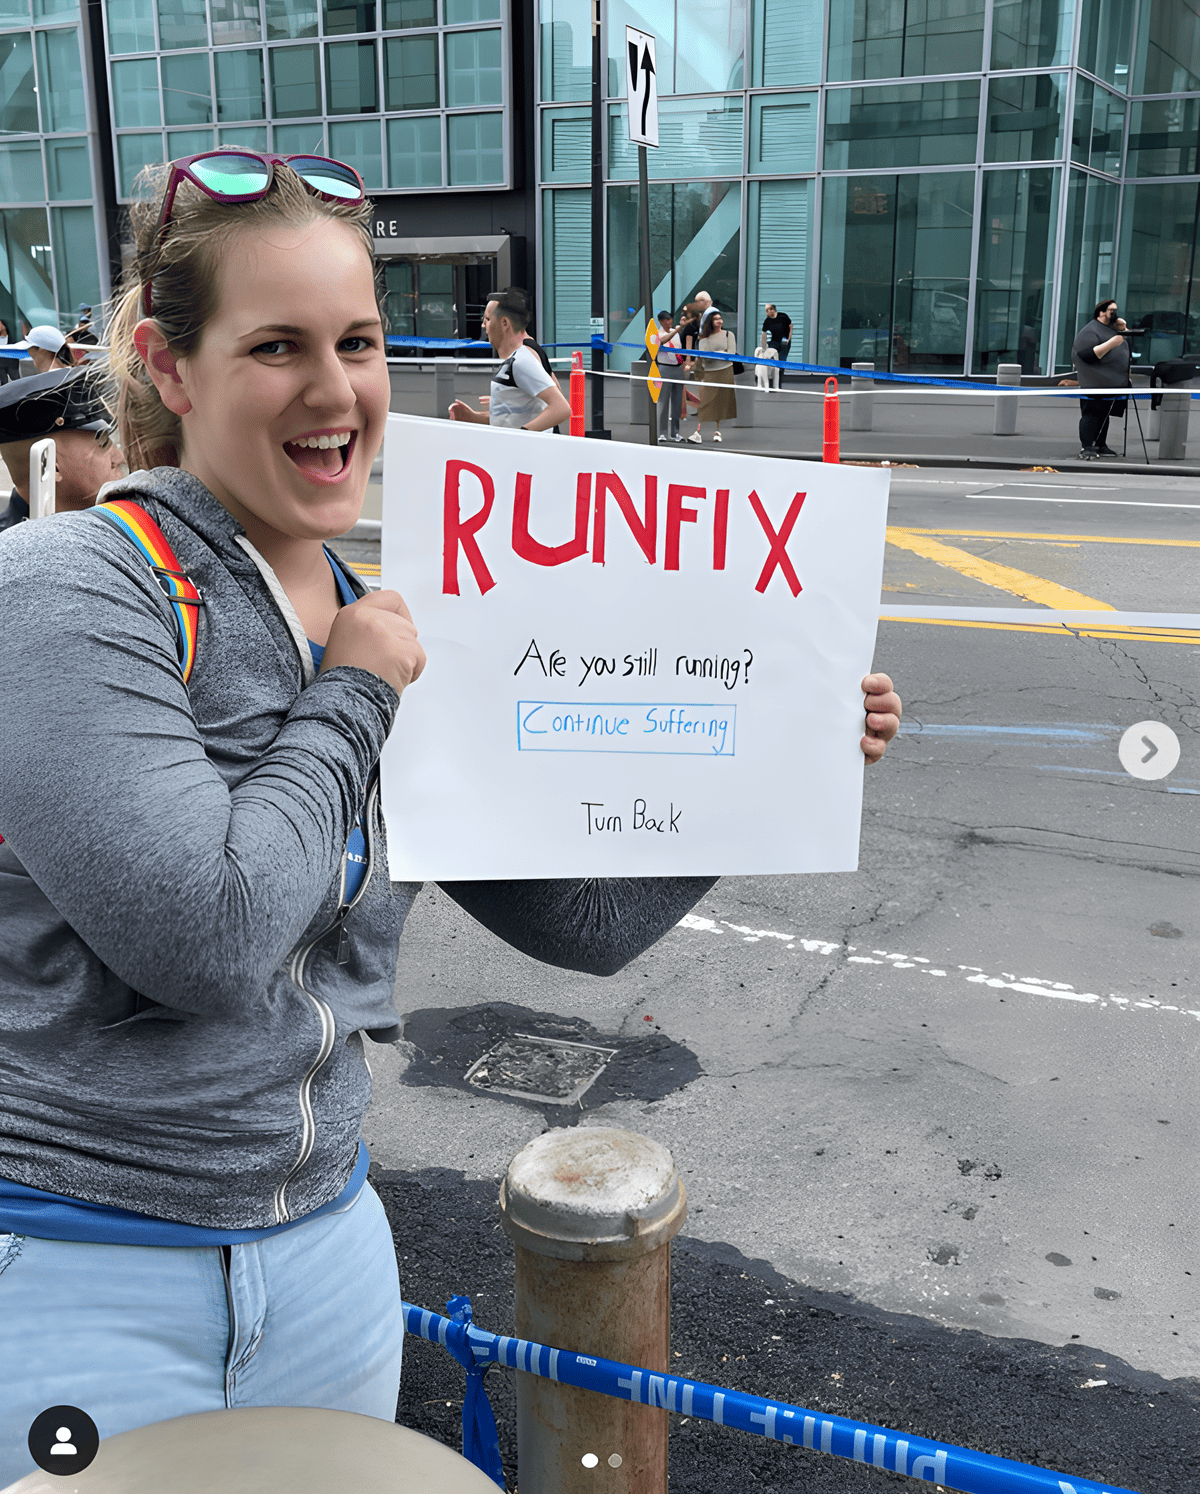 A funny race sign modeled off of the netflix 